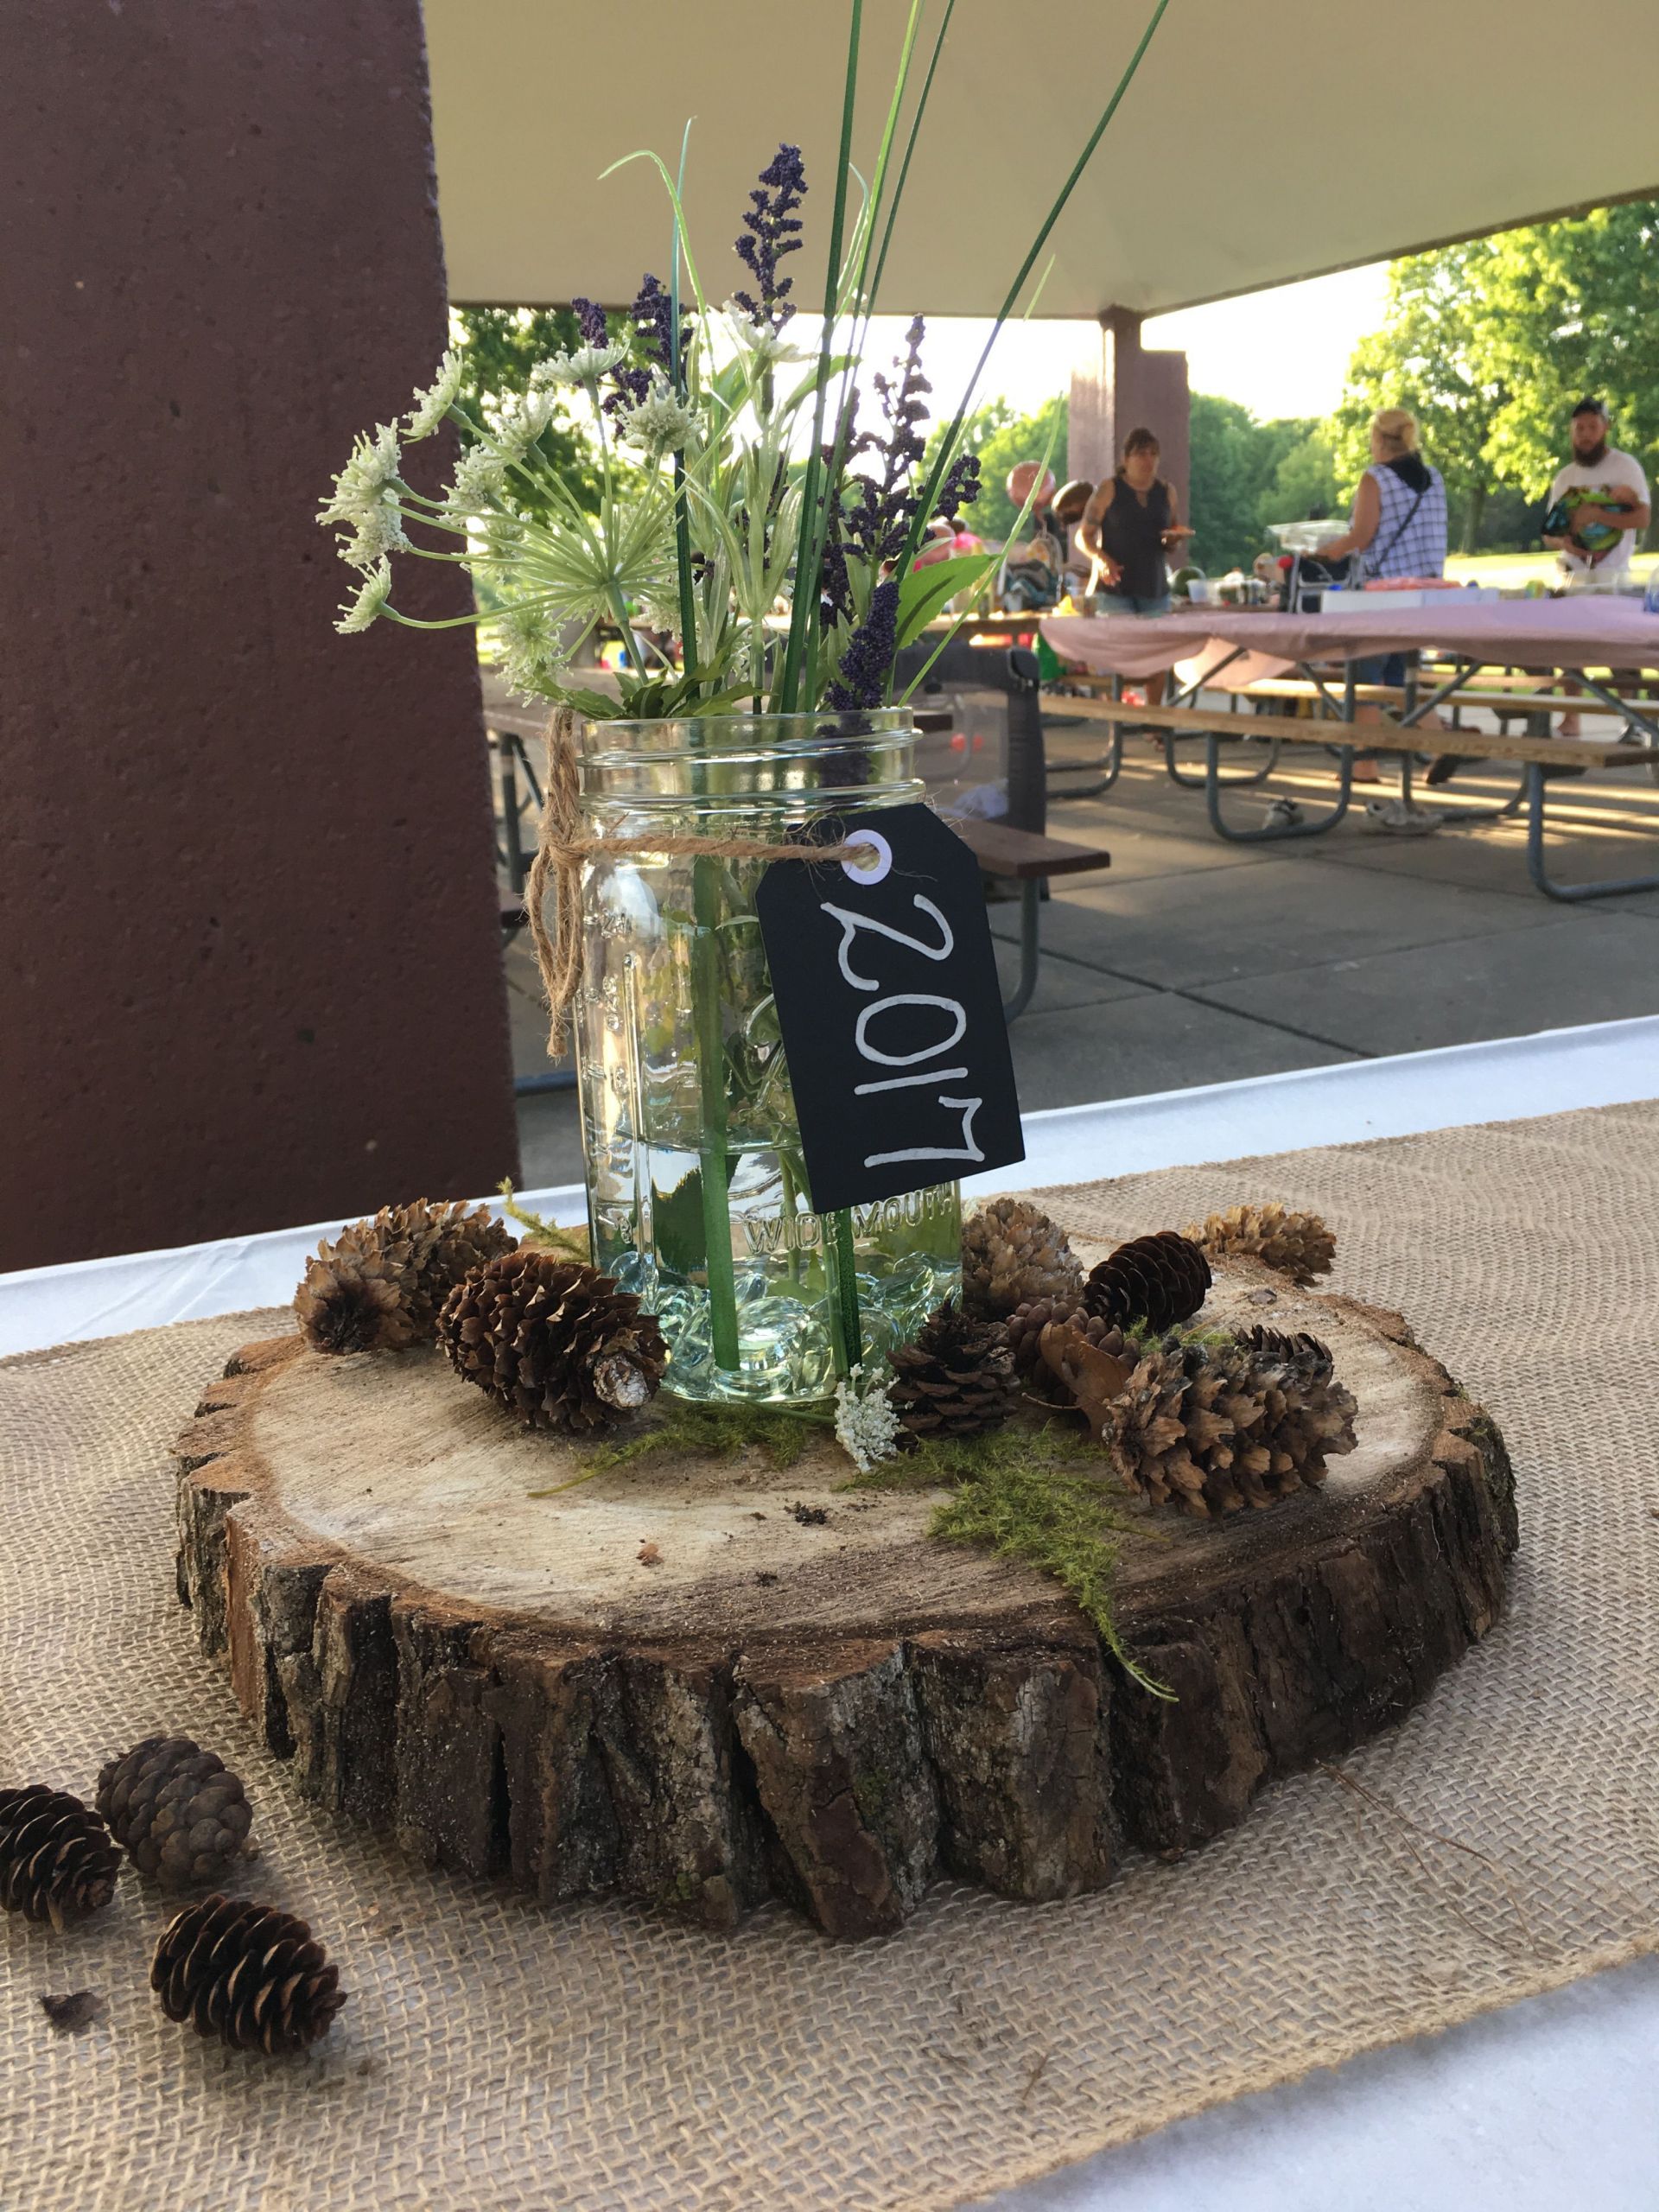 Outdoor College Graduation Party Ideas
 Woodsy Rustic graduation party